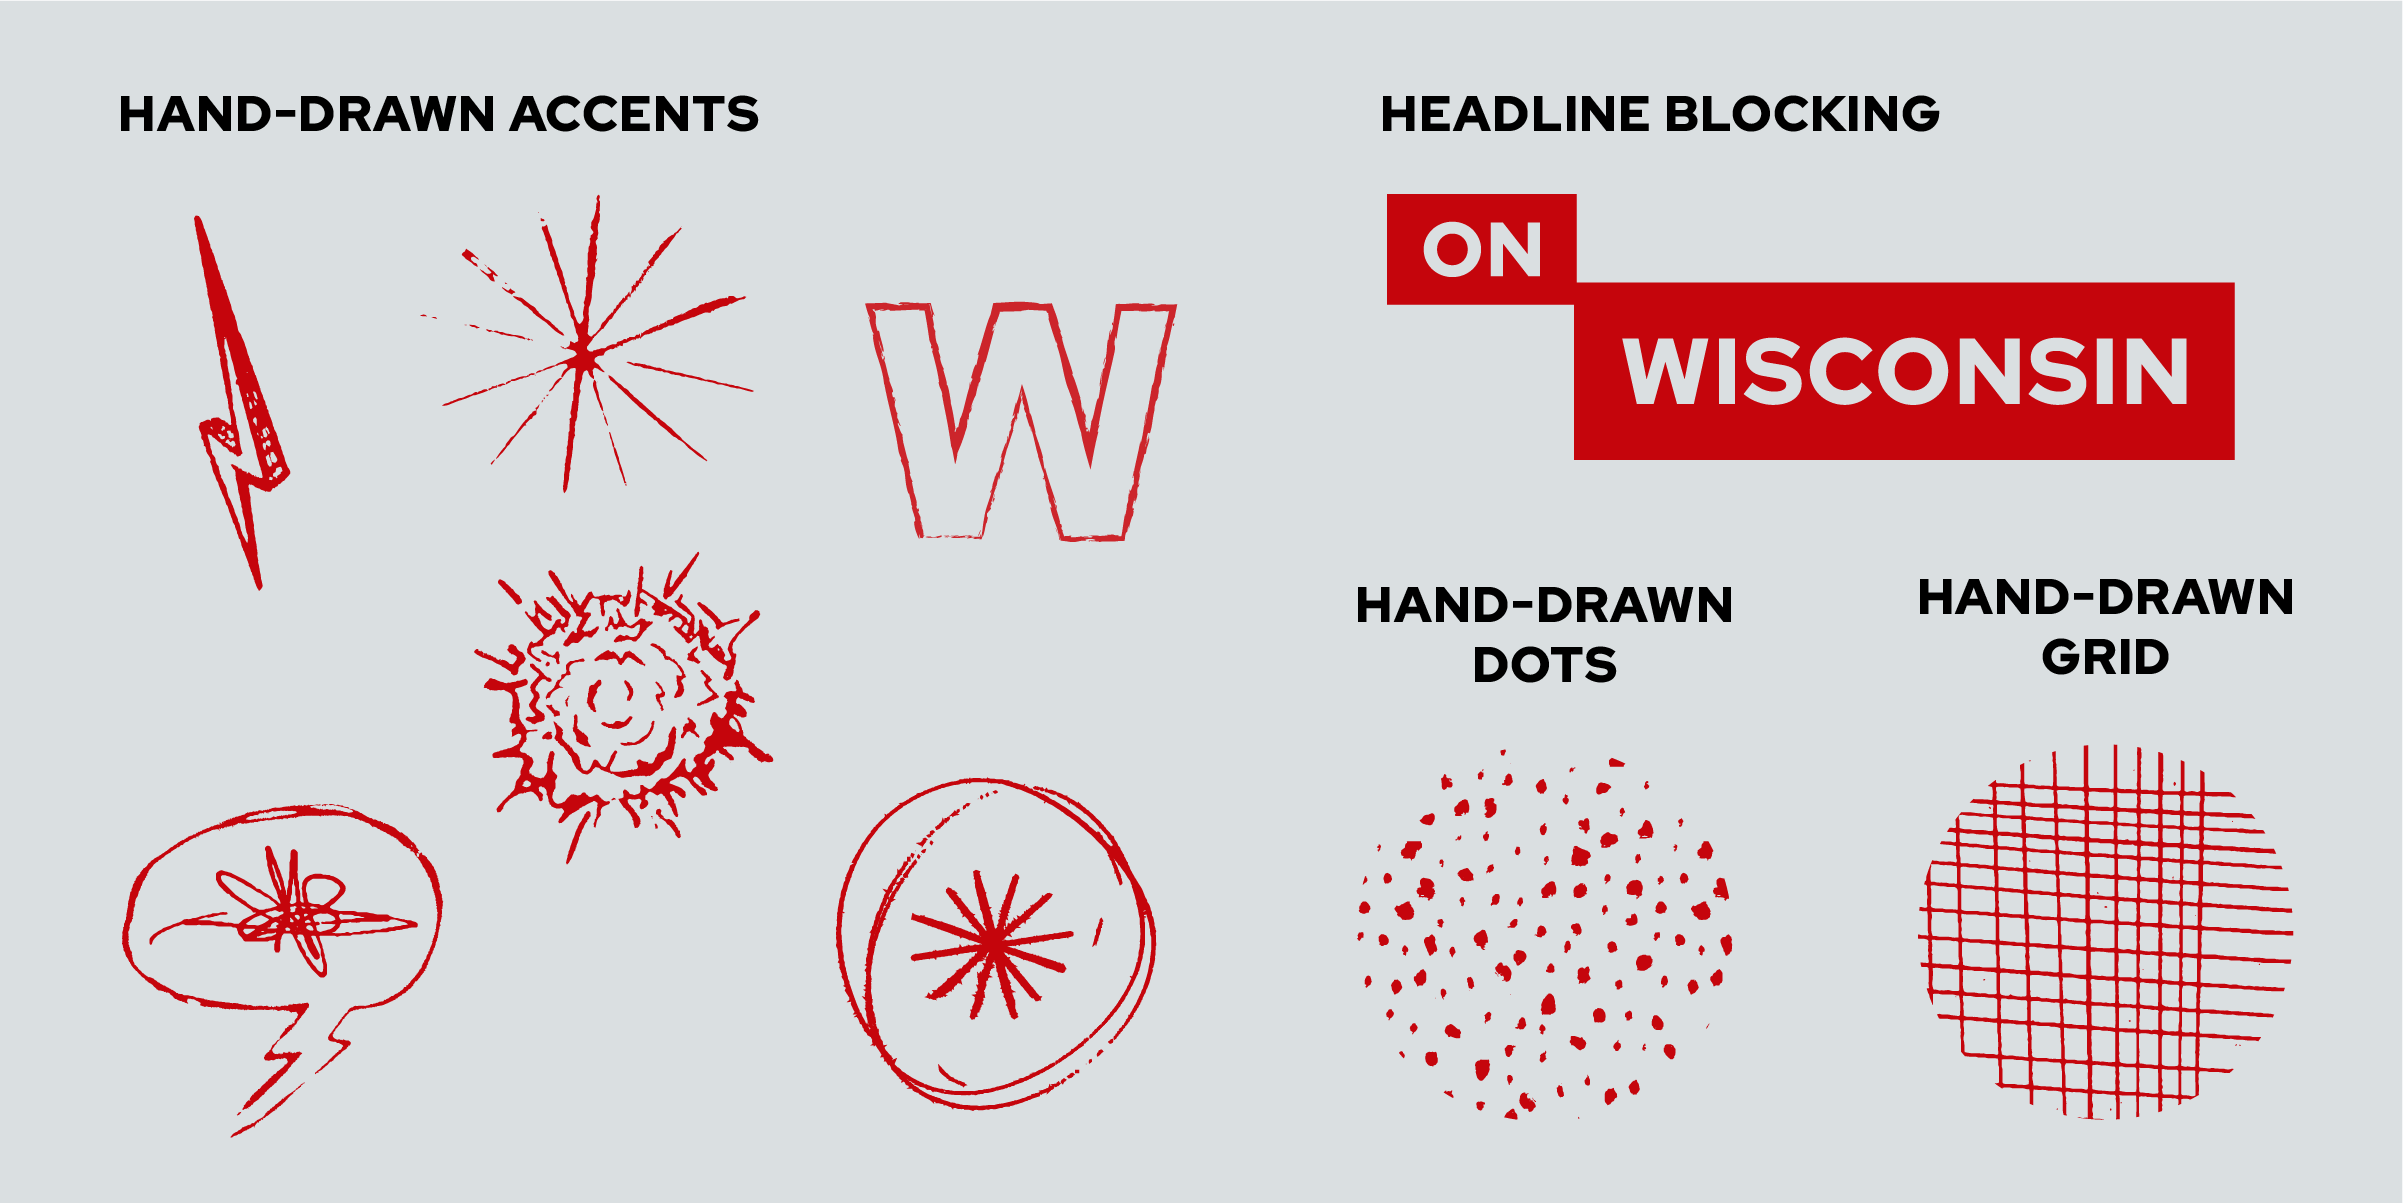 Image of hand-drawn brand accents to use with the UW brand.